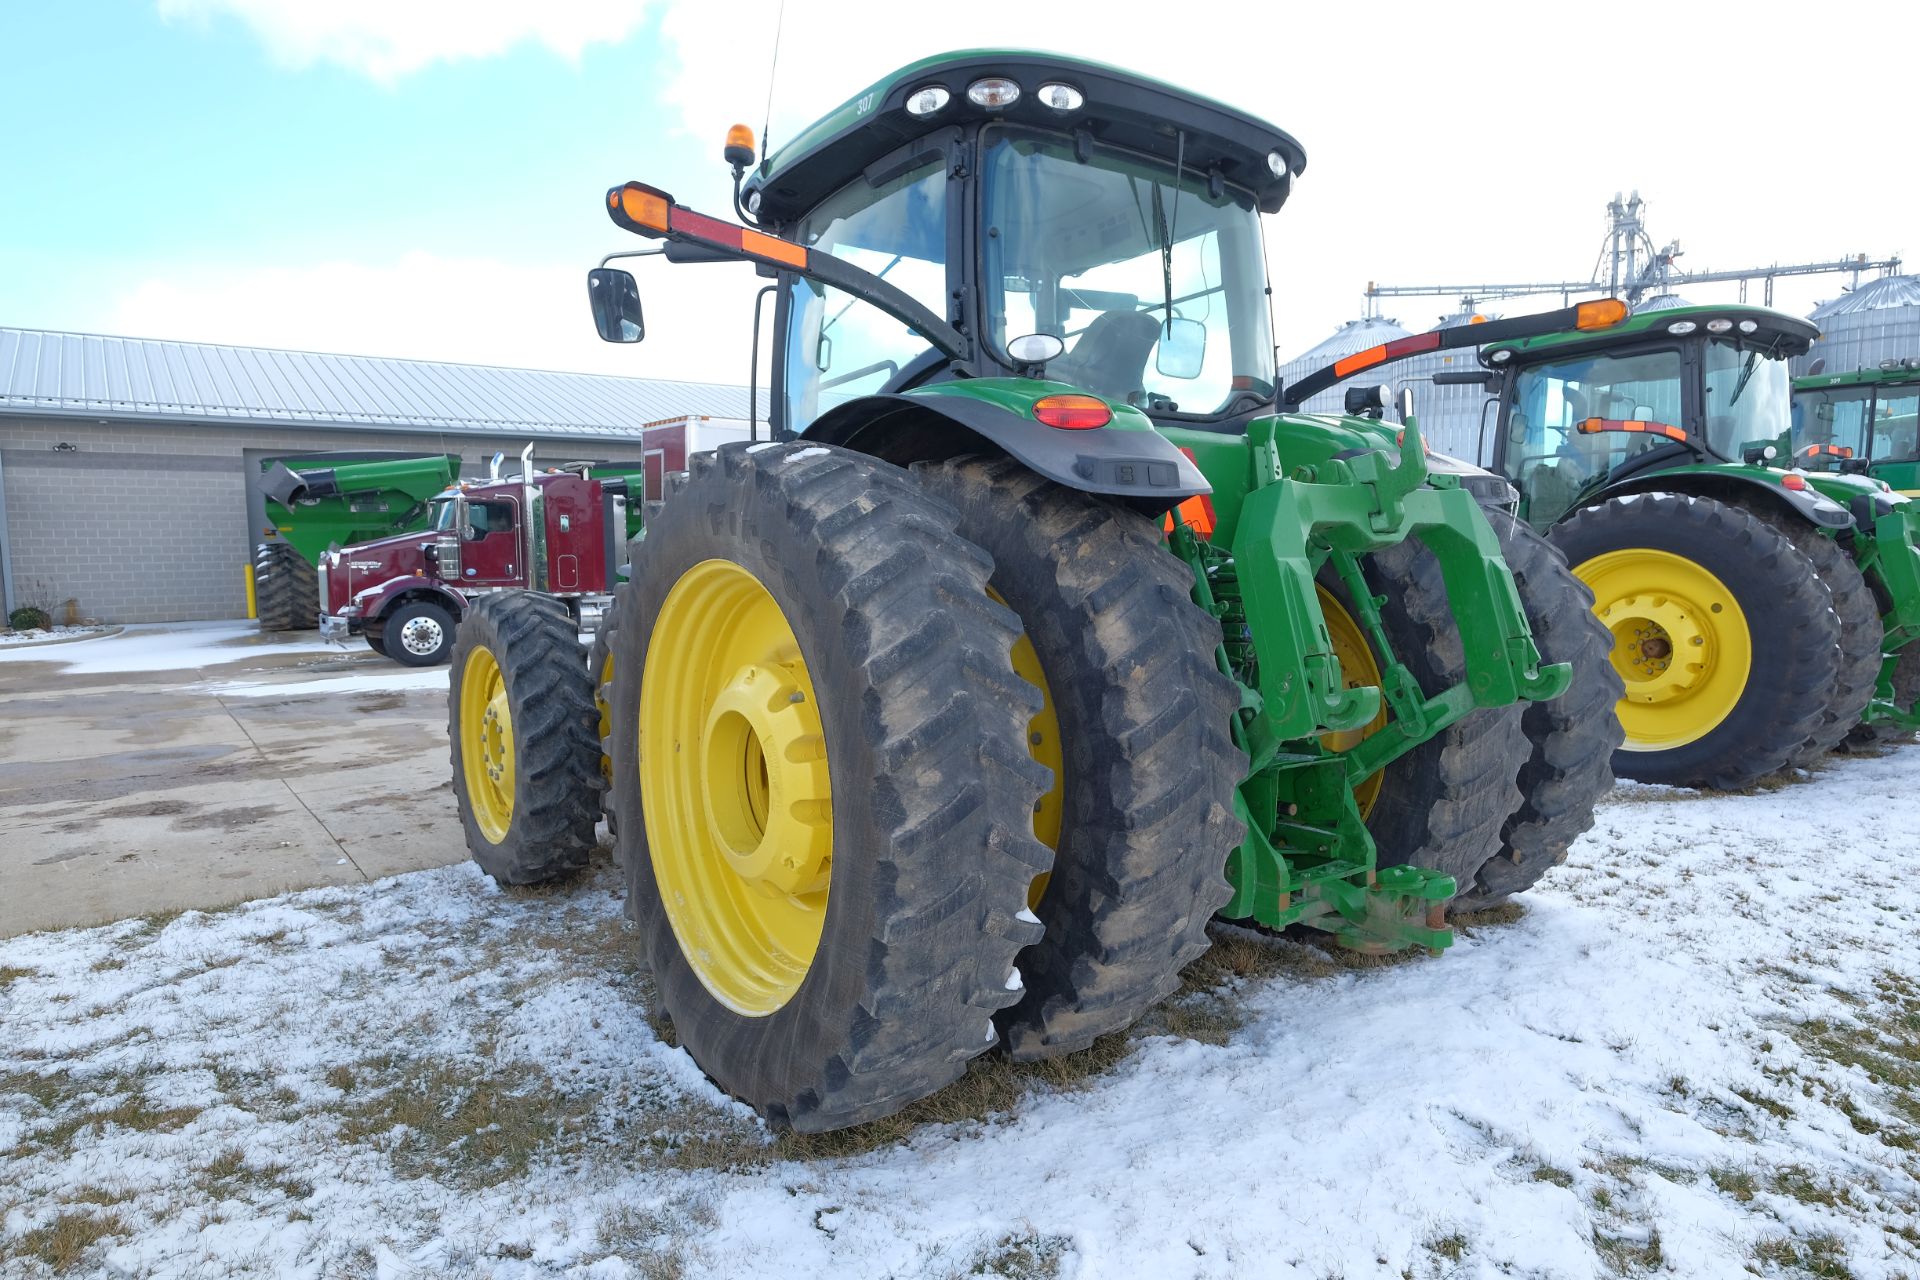 John Deere Tractor 8360 (2012) - 1RW8360RPCD057229 - 2,525 hours, 360 hp,mwfd, ivt transmission with - Image 3 of 14